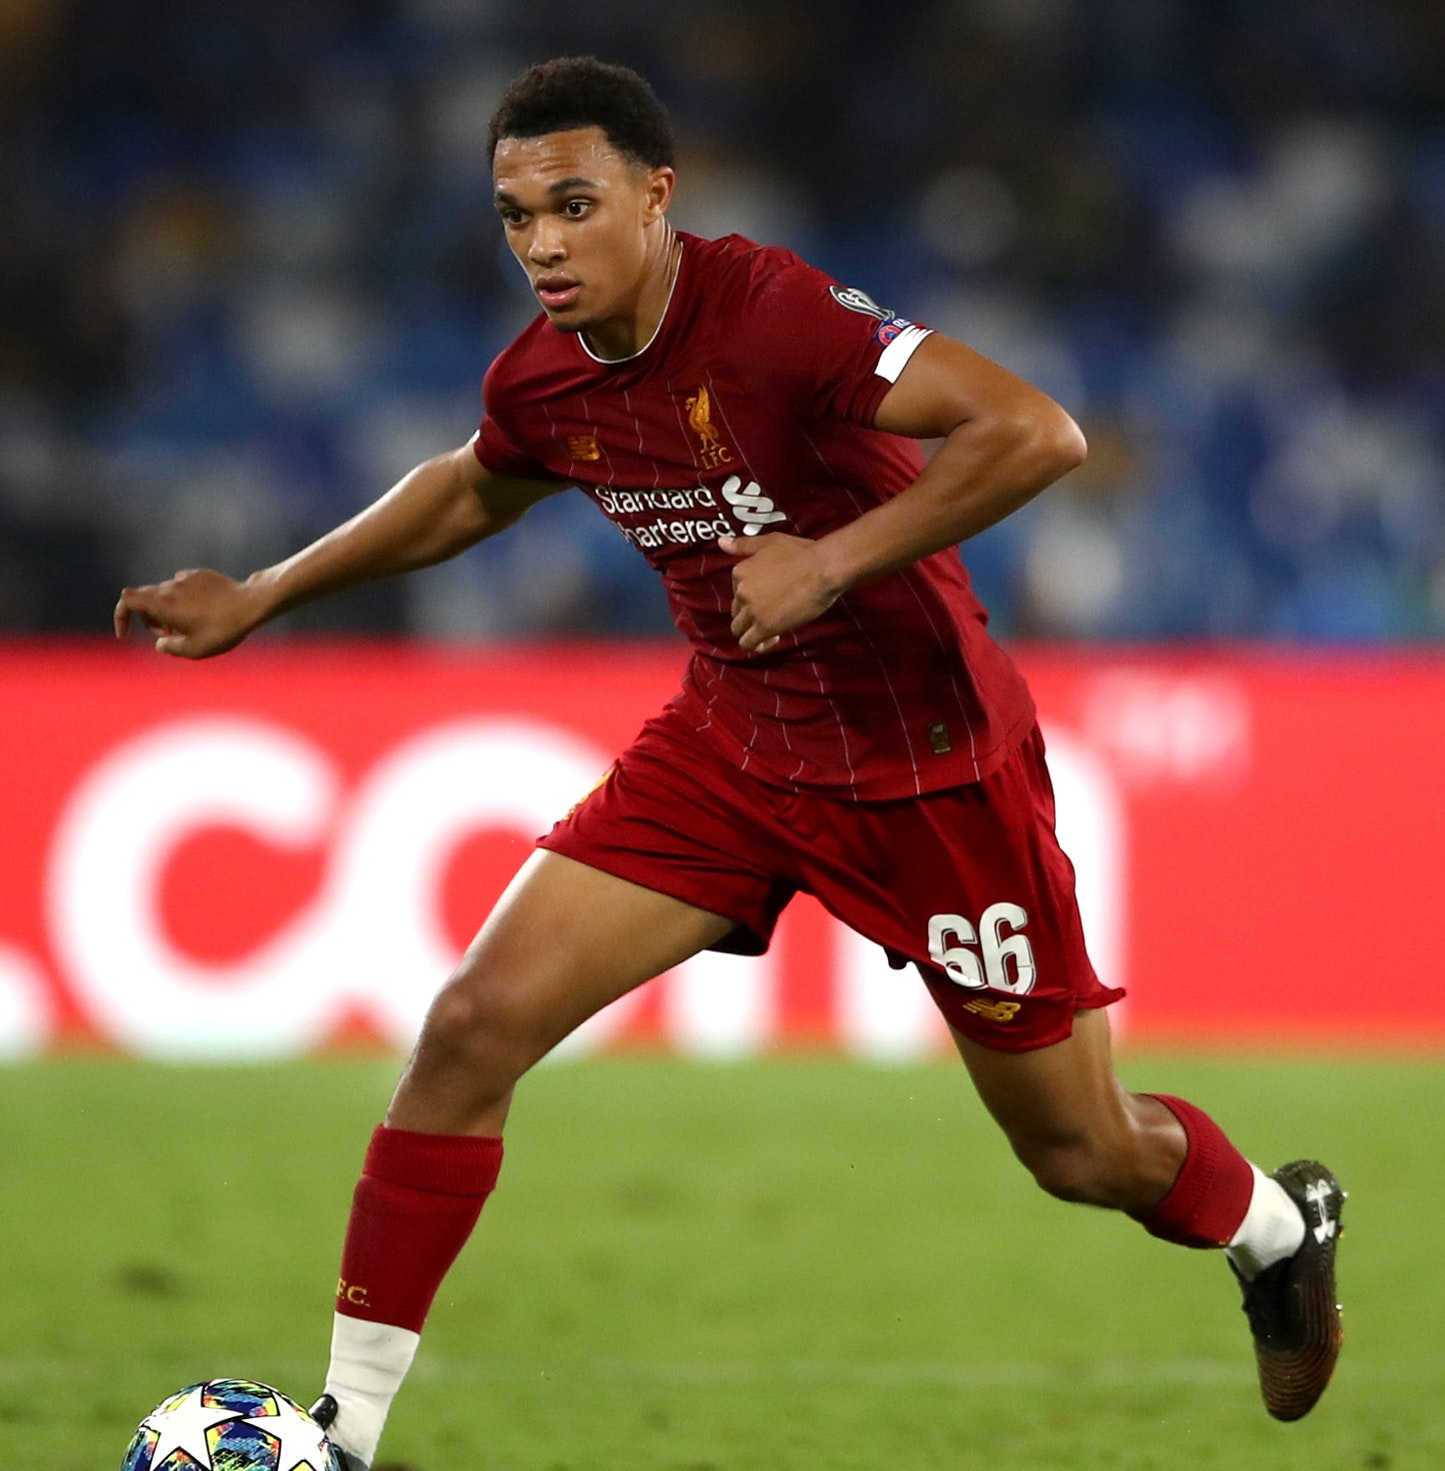 (Image) Alleged picture of Liverpool’s Trent Alexander-Arnold in an Everton shirt drops online